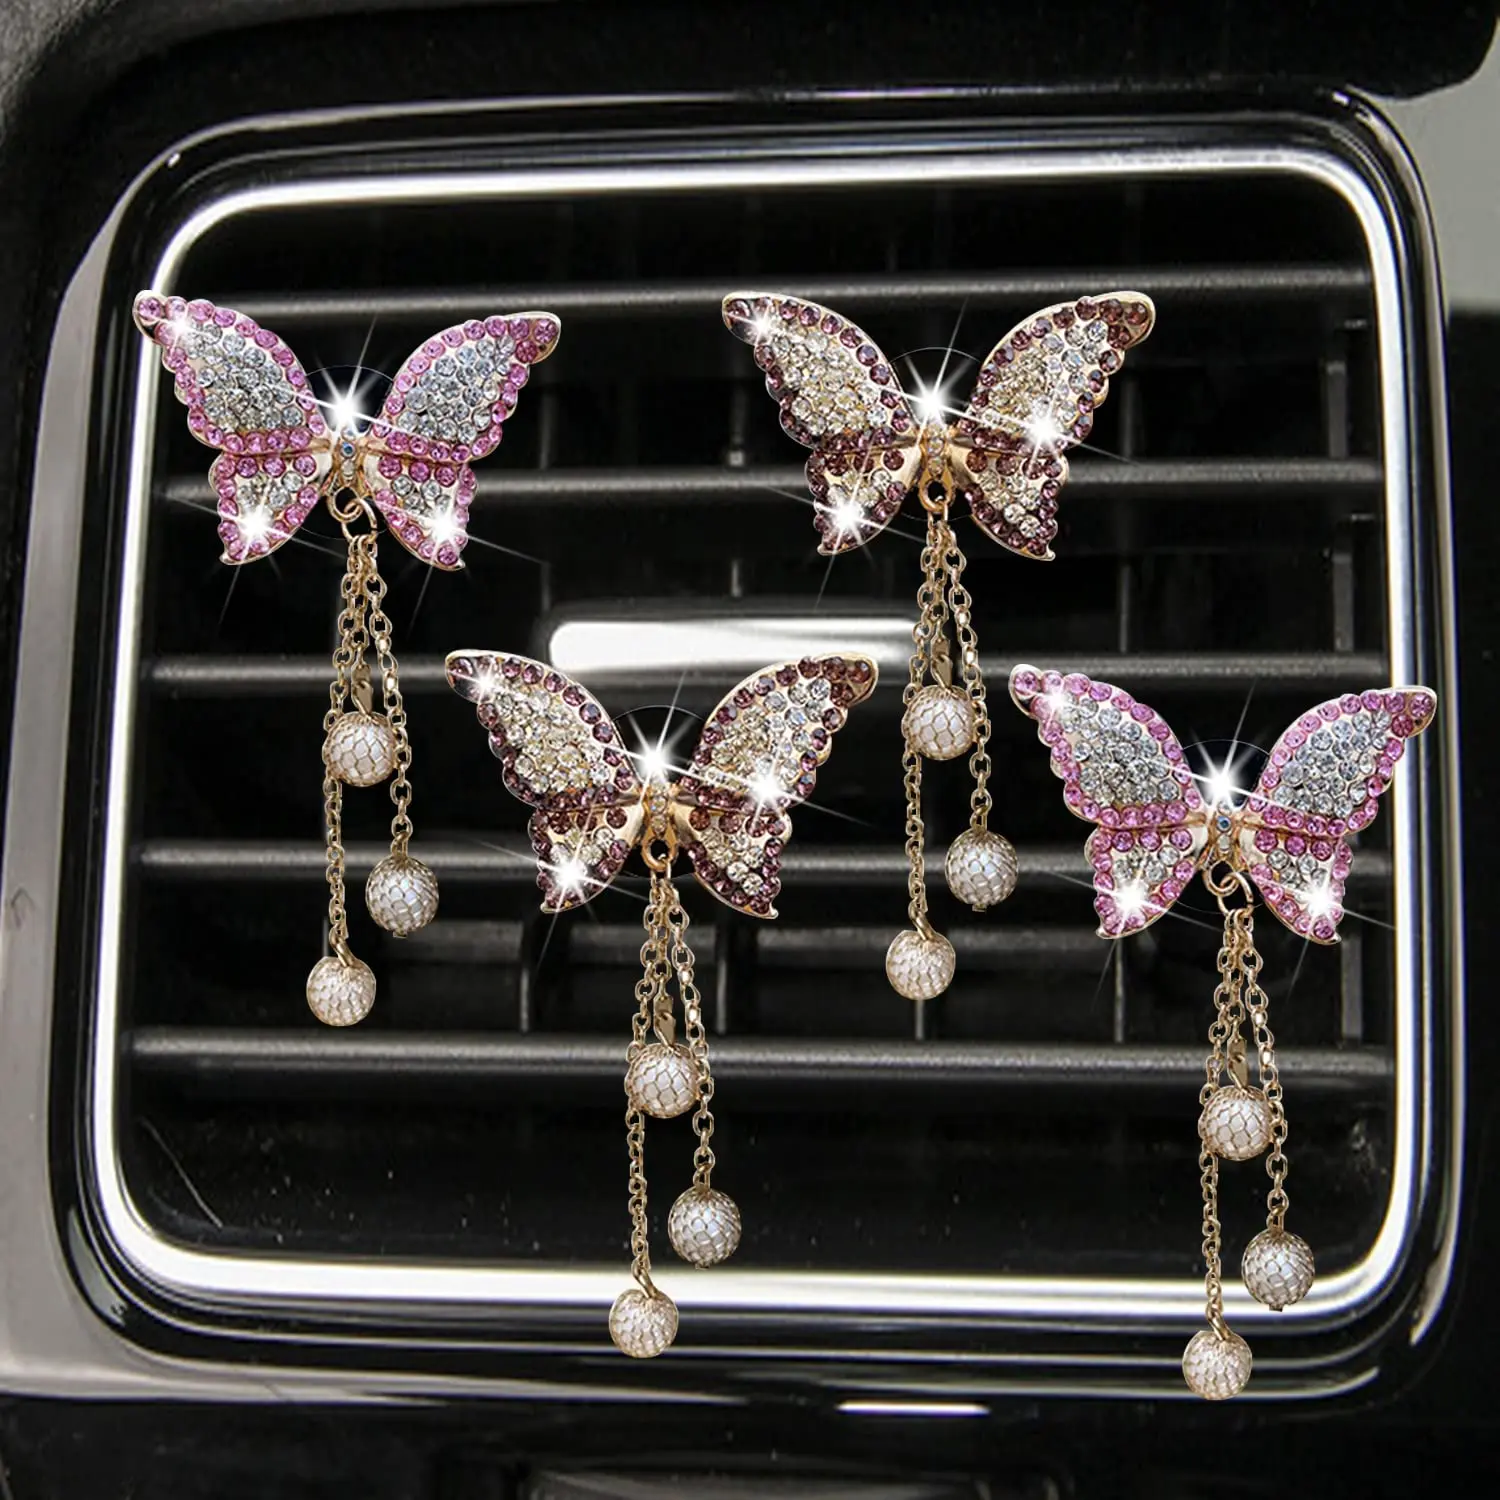 

4 Pieces Bling Butterfly Car Vent Clip Air Freshener Perfume Diffuser Conditioning Outlet Automobile Interior Decor Accessories